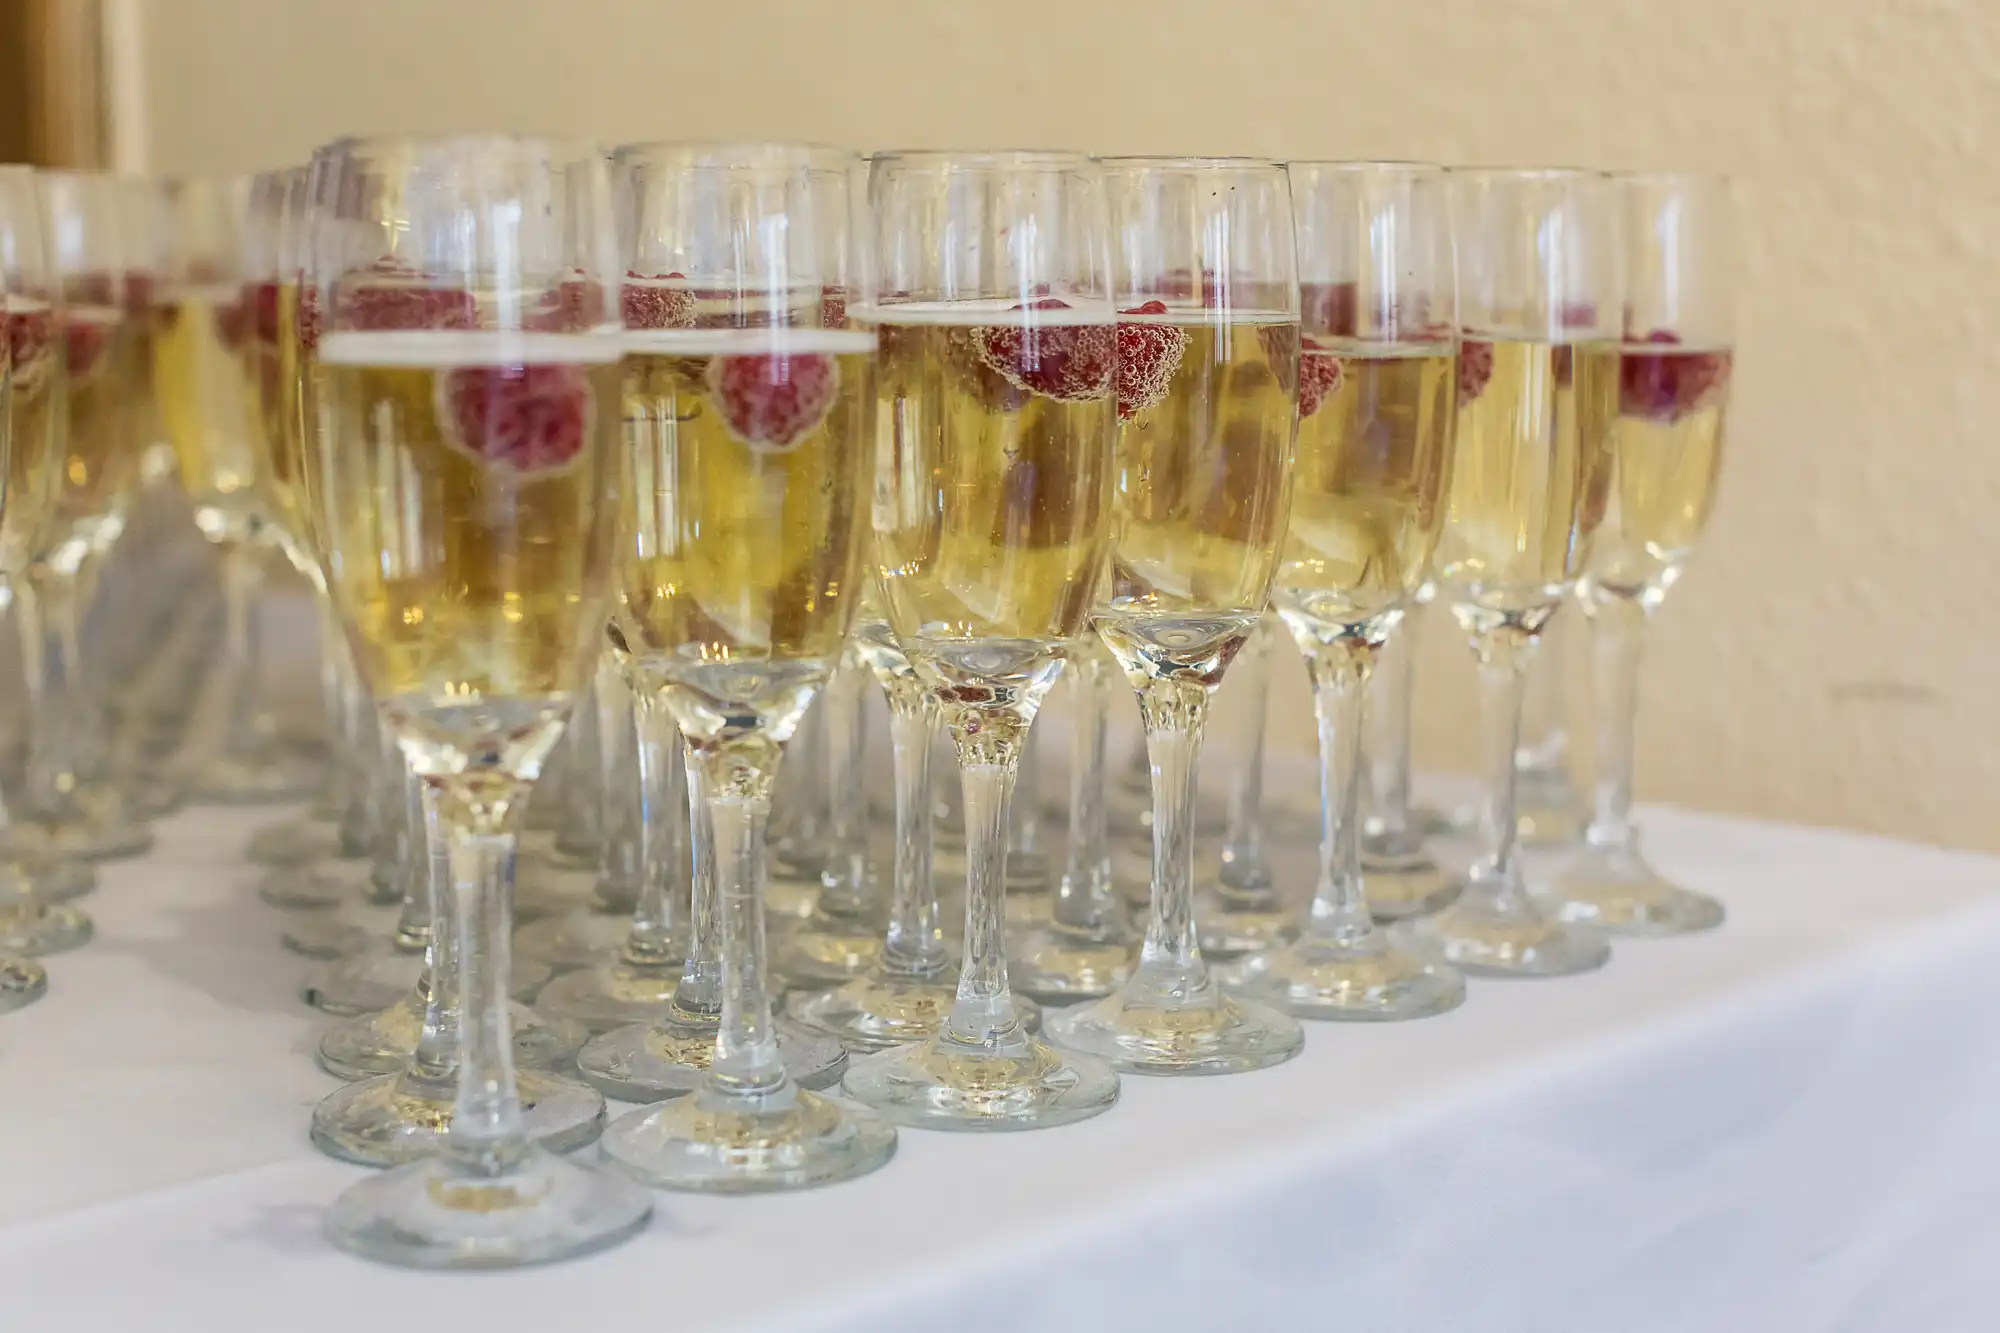 Glasses of champagne with raspberries on a table, lined up for a celebration.